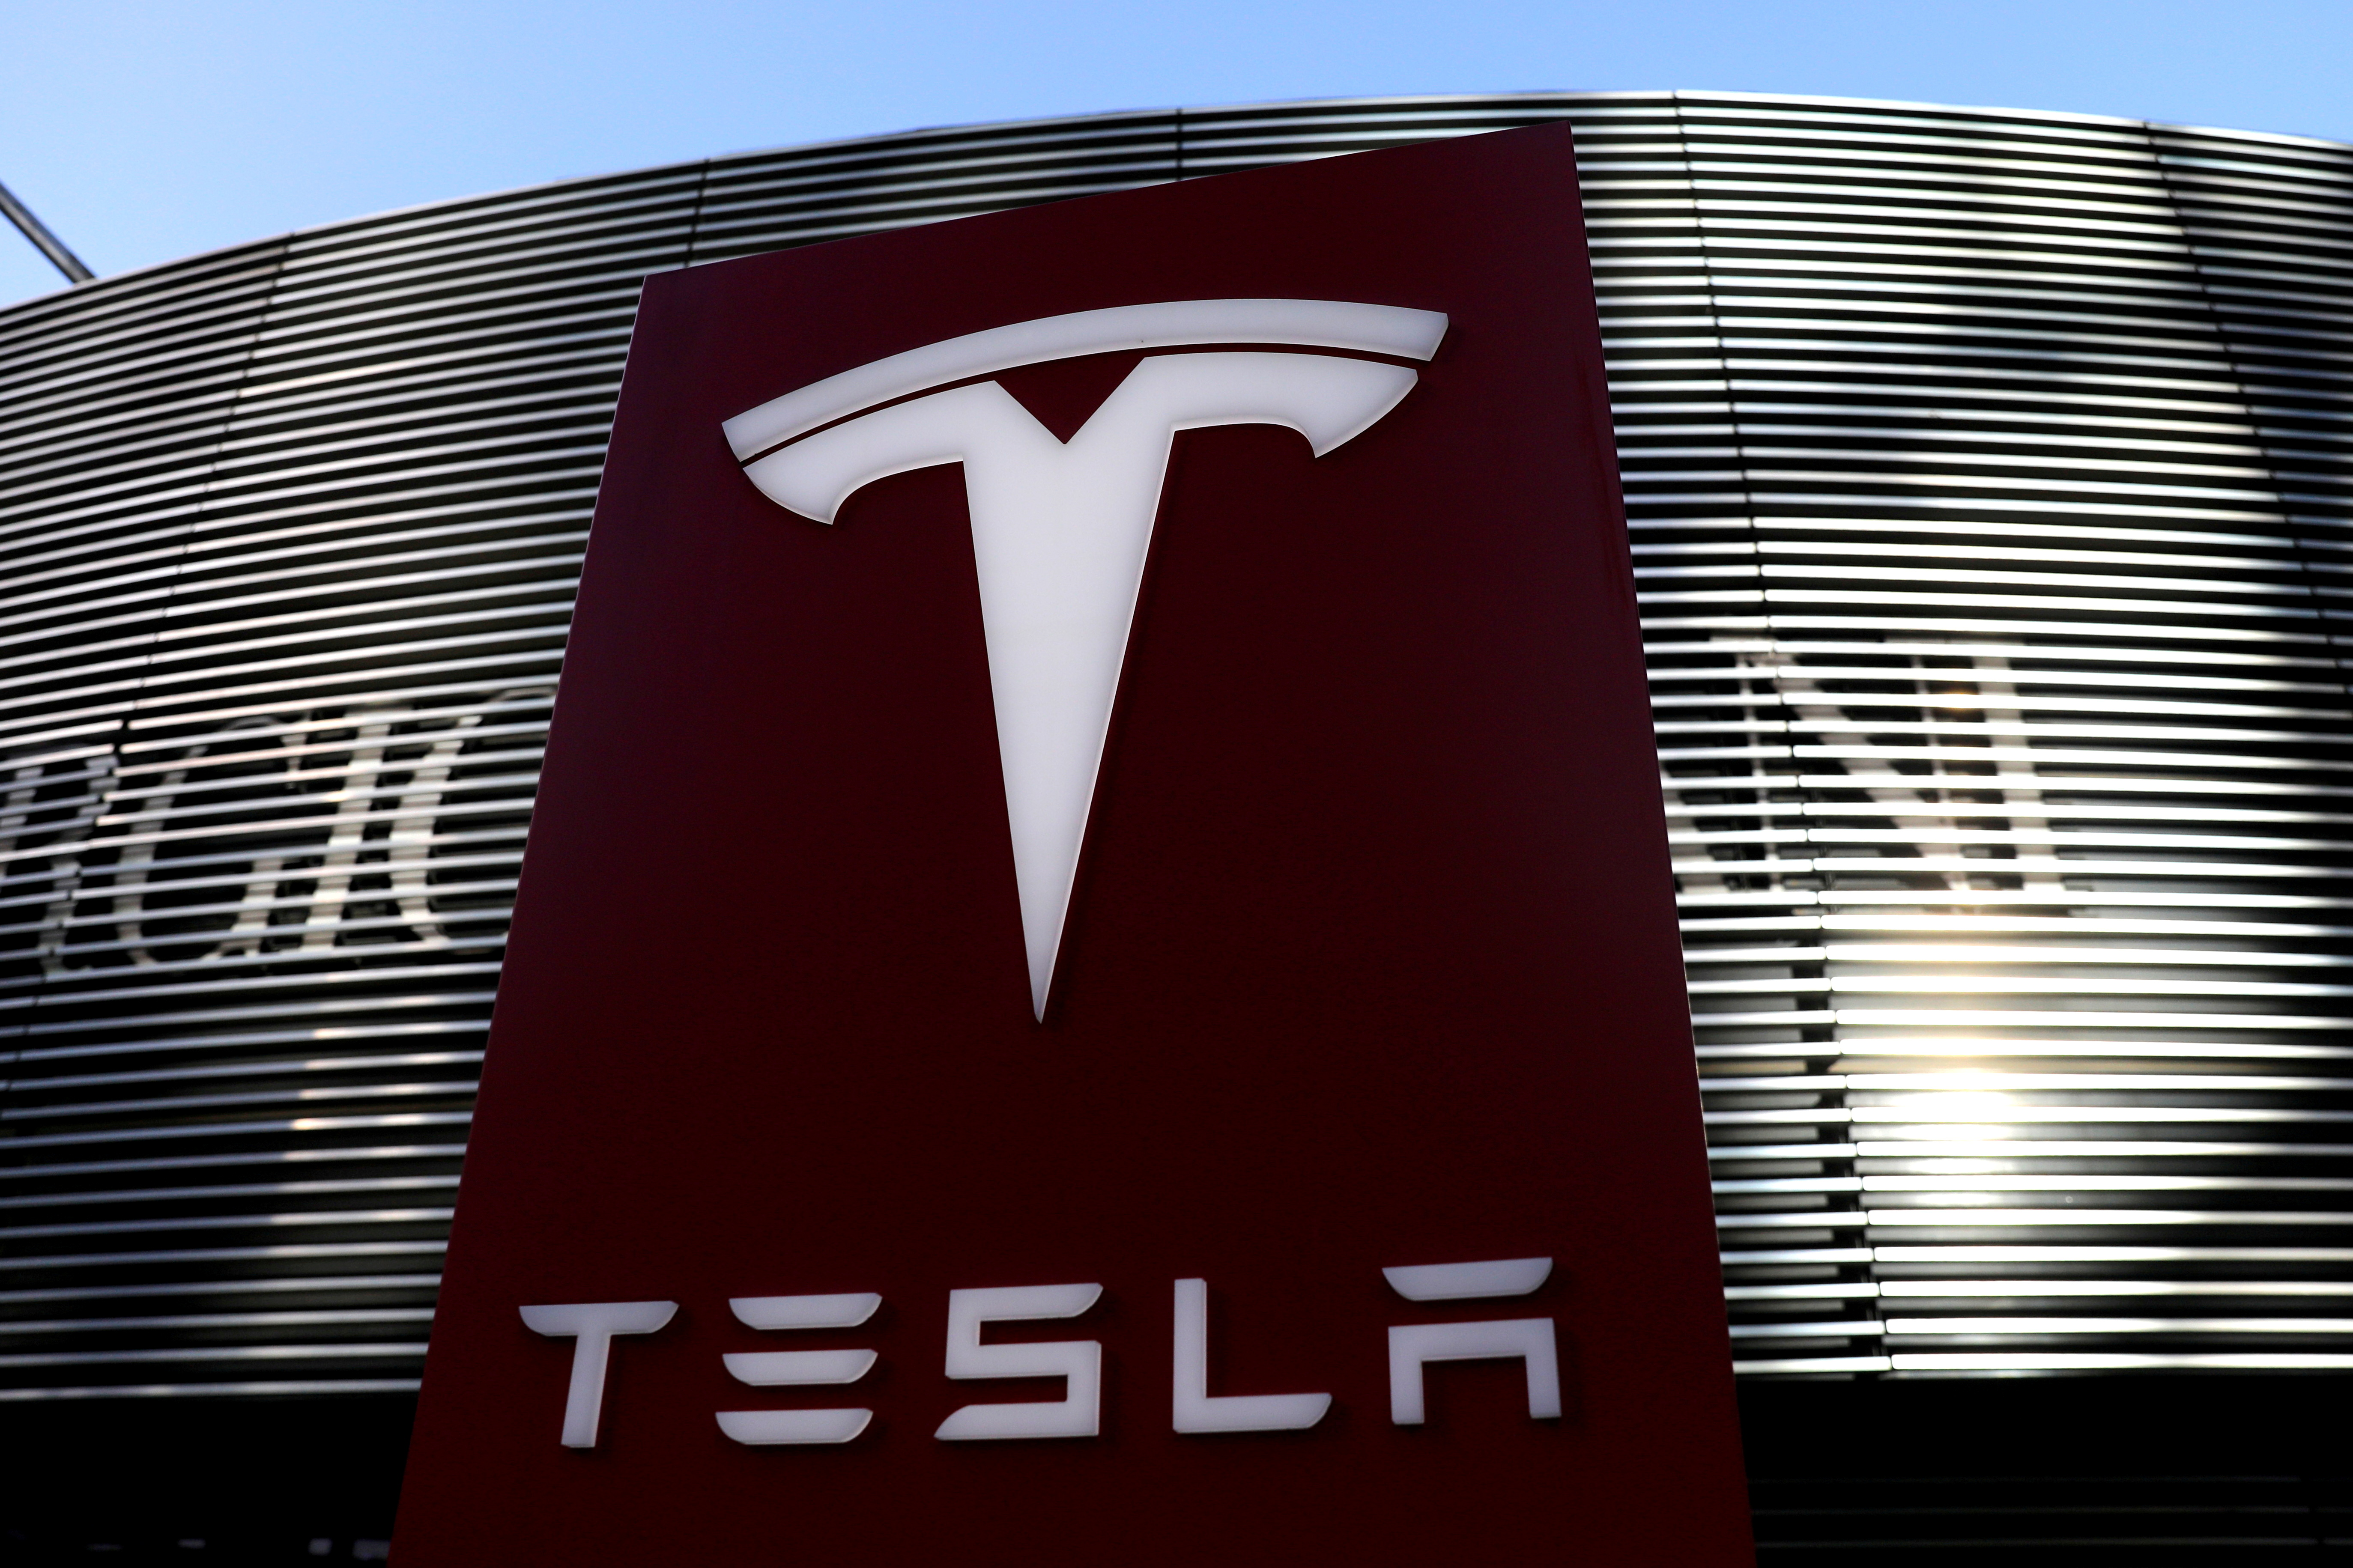 A logo of the electric vehicle maker Tesla is seen near a shopping complex in Beijing, China January 5, 2021. REUTERS/Tingshu Wang